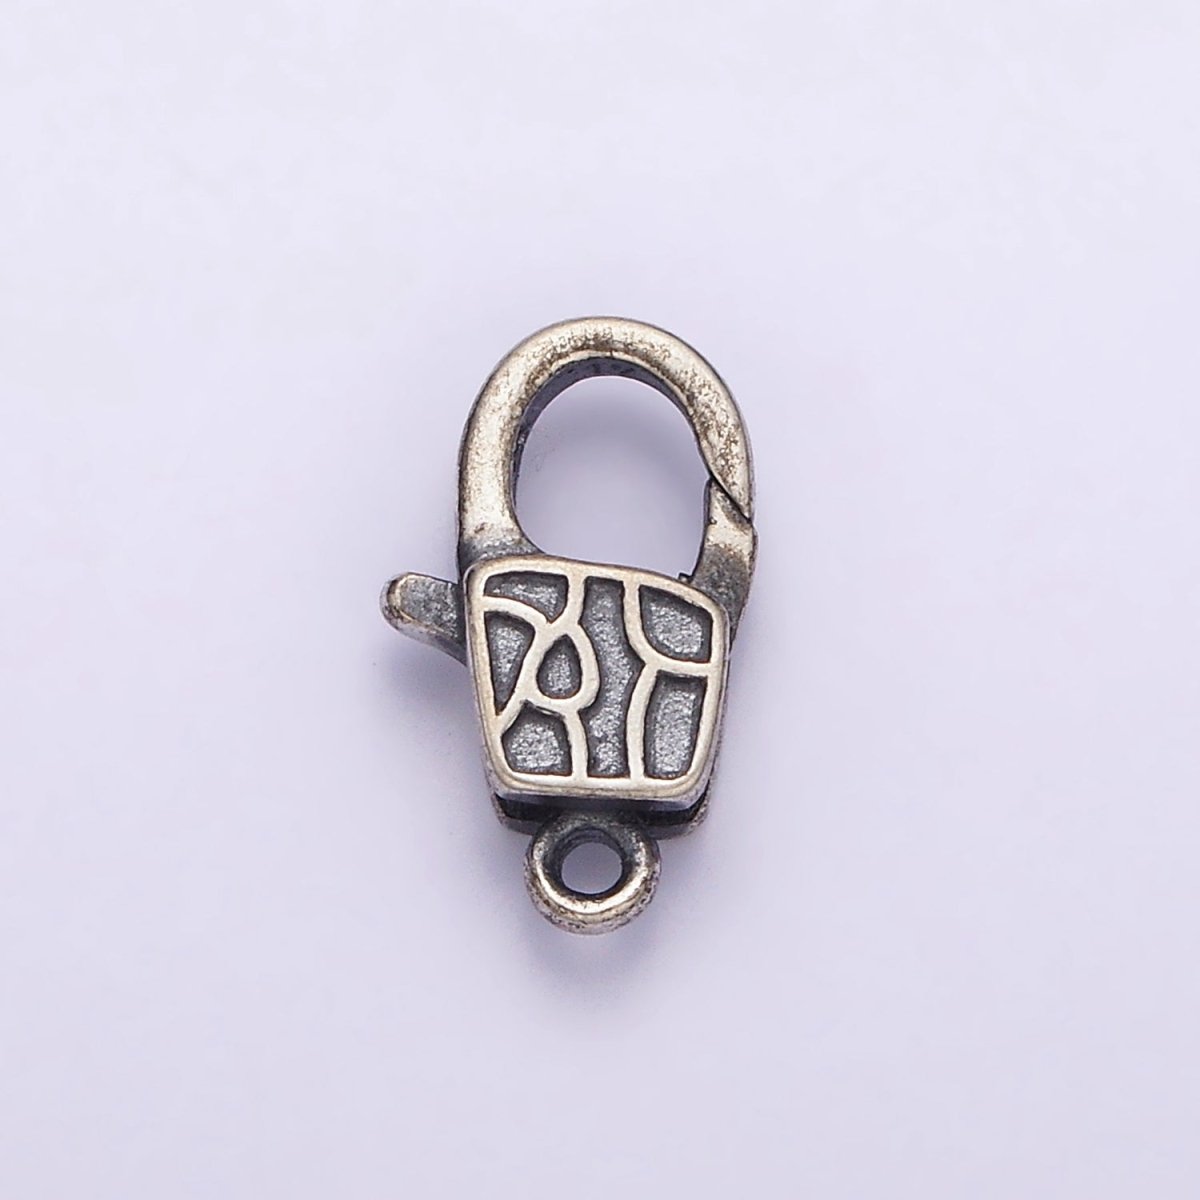 Antique Silver Clasp s925 Sterling Silver Vintage Lobster Clasp for Jewelry Making SL-298 - DLUXCA